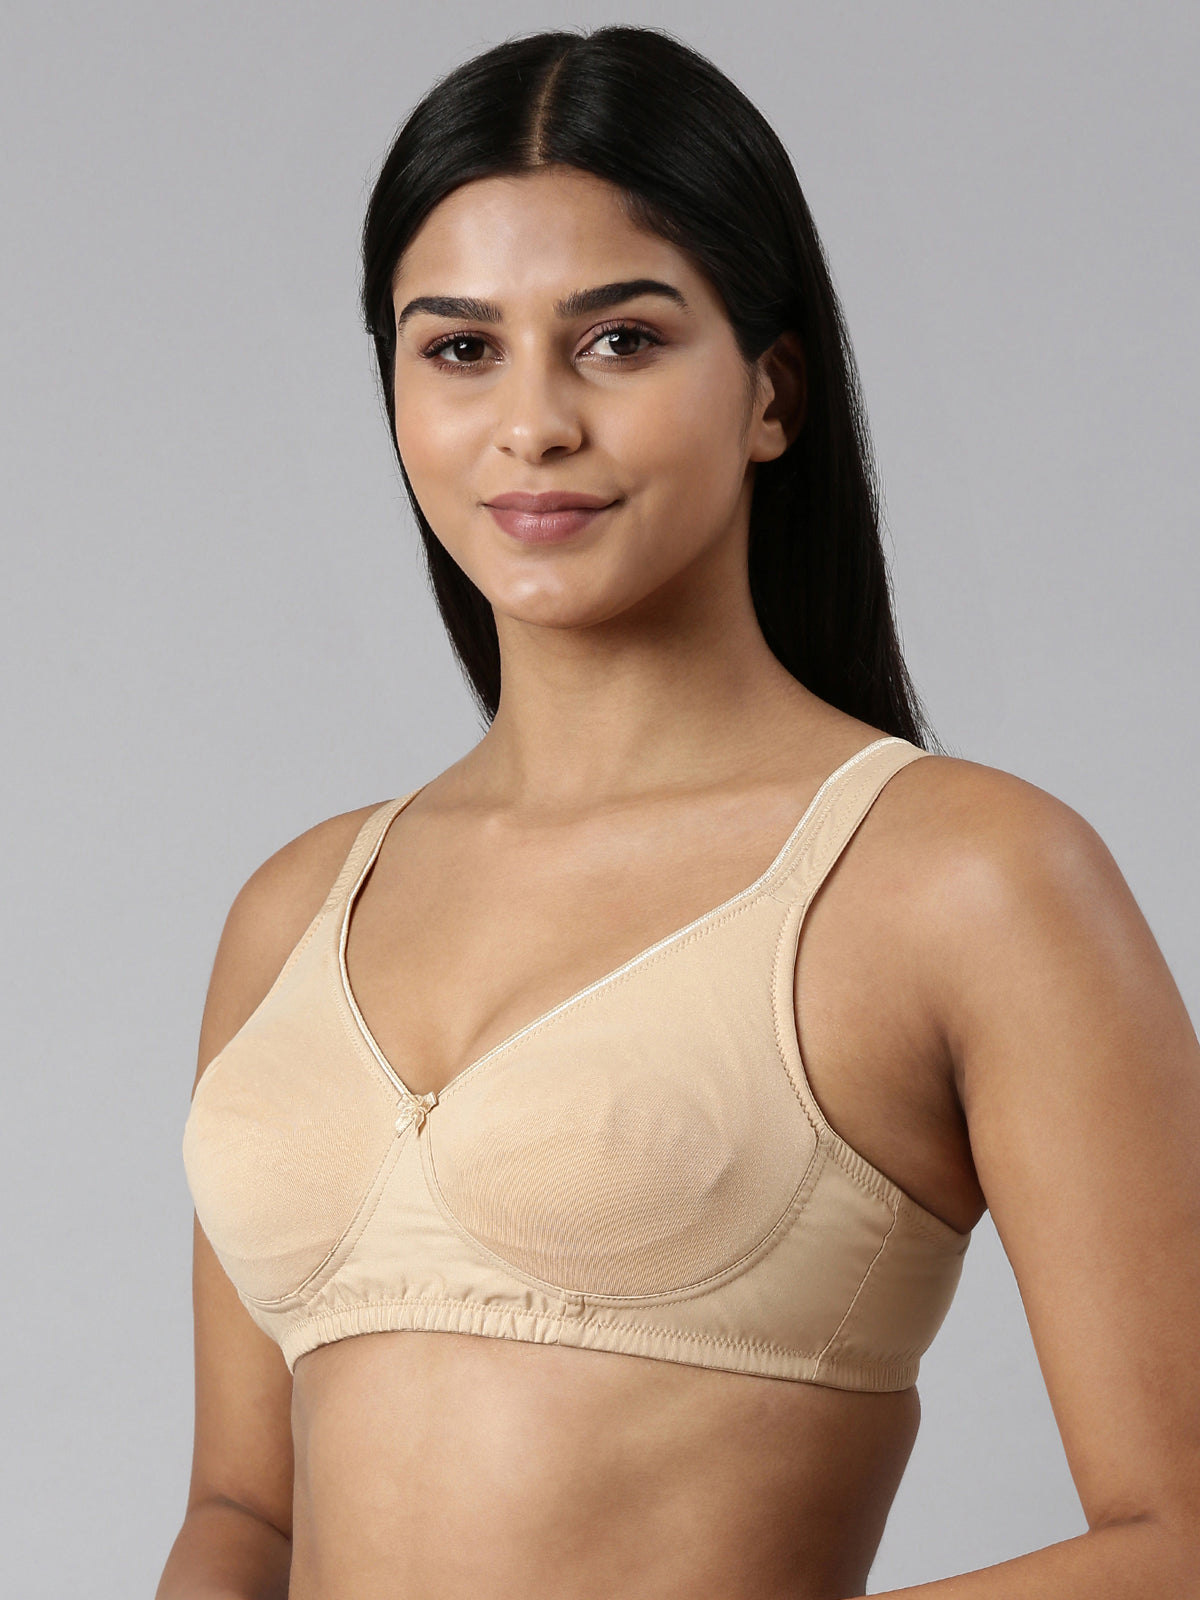 blossom-circlet-skin2-woven knitted-support bra